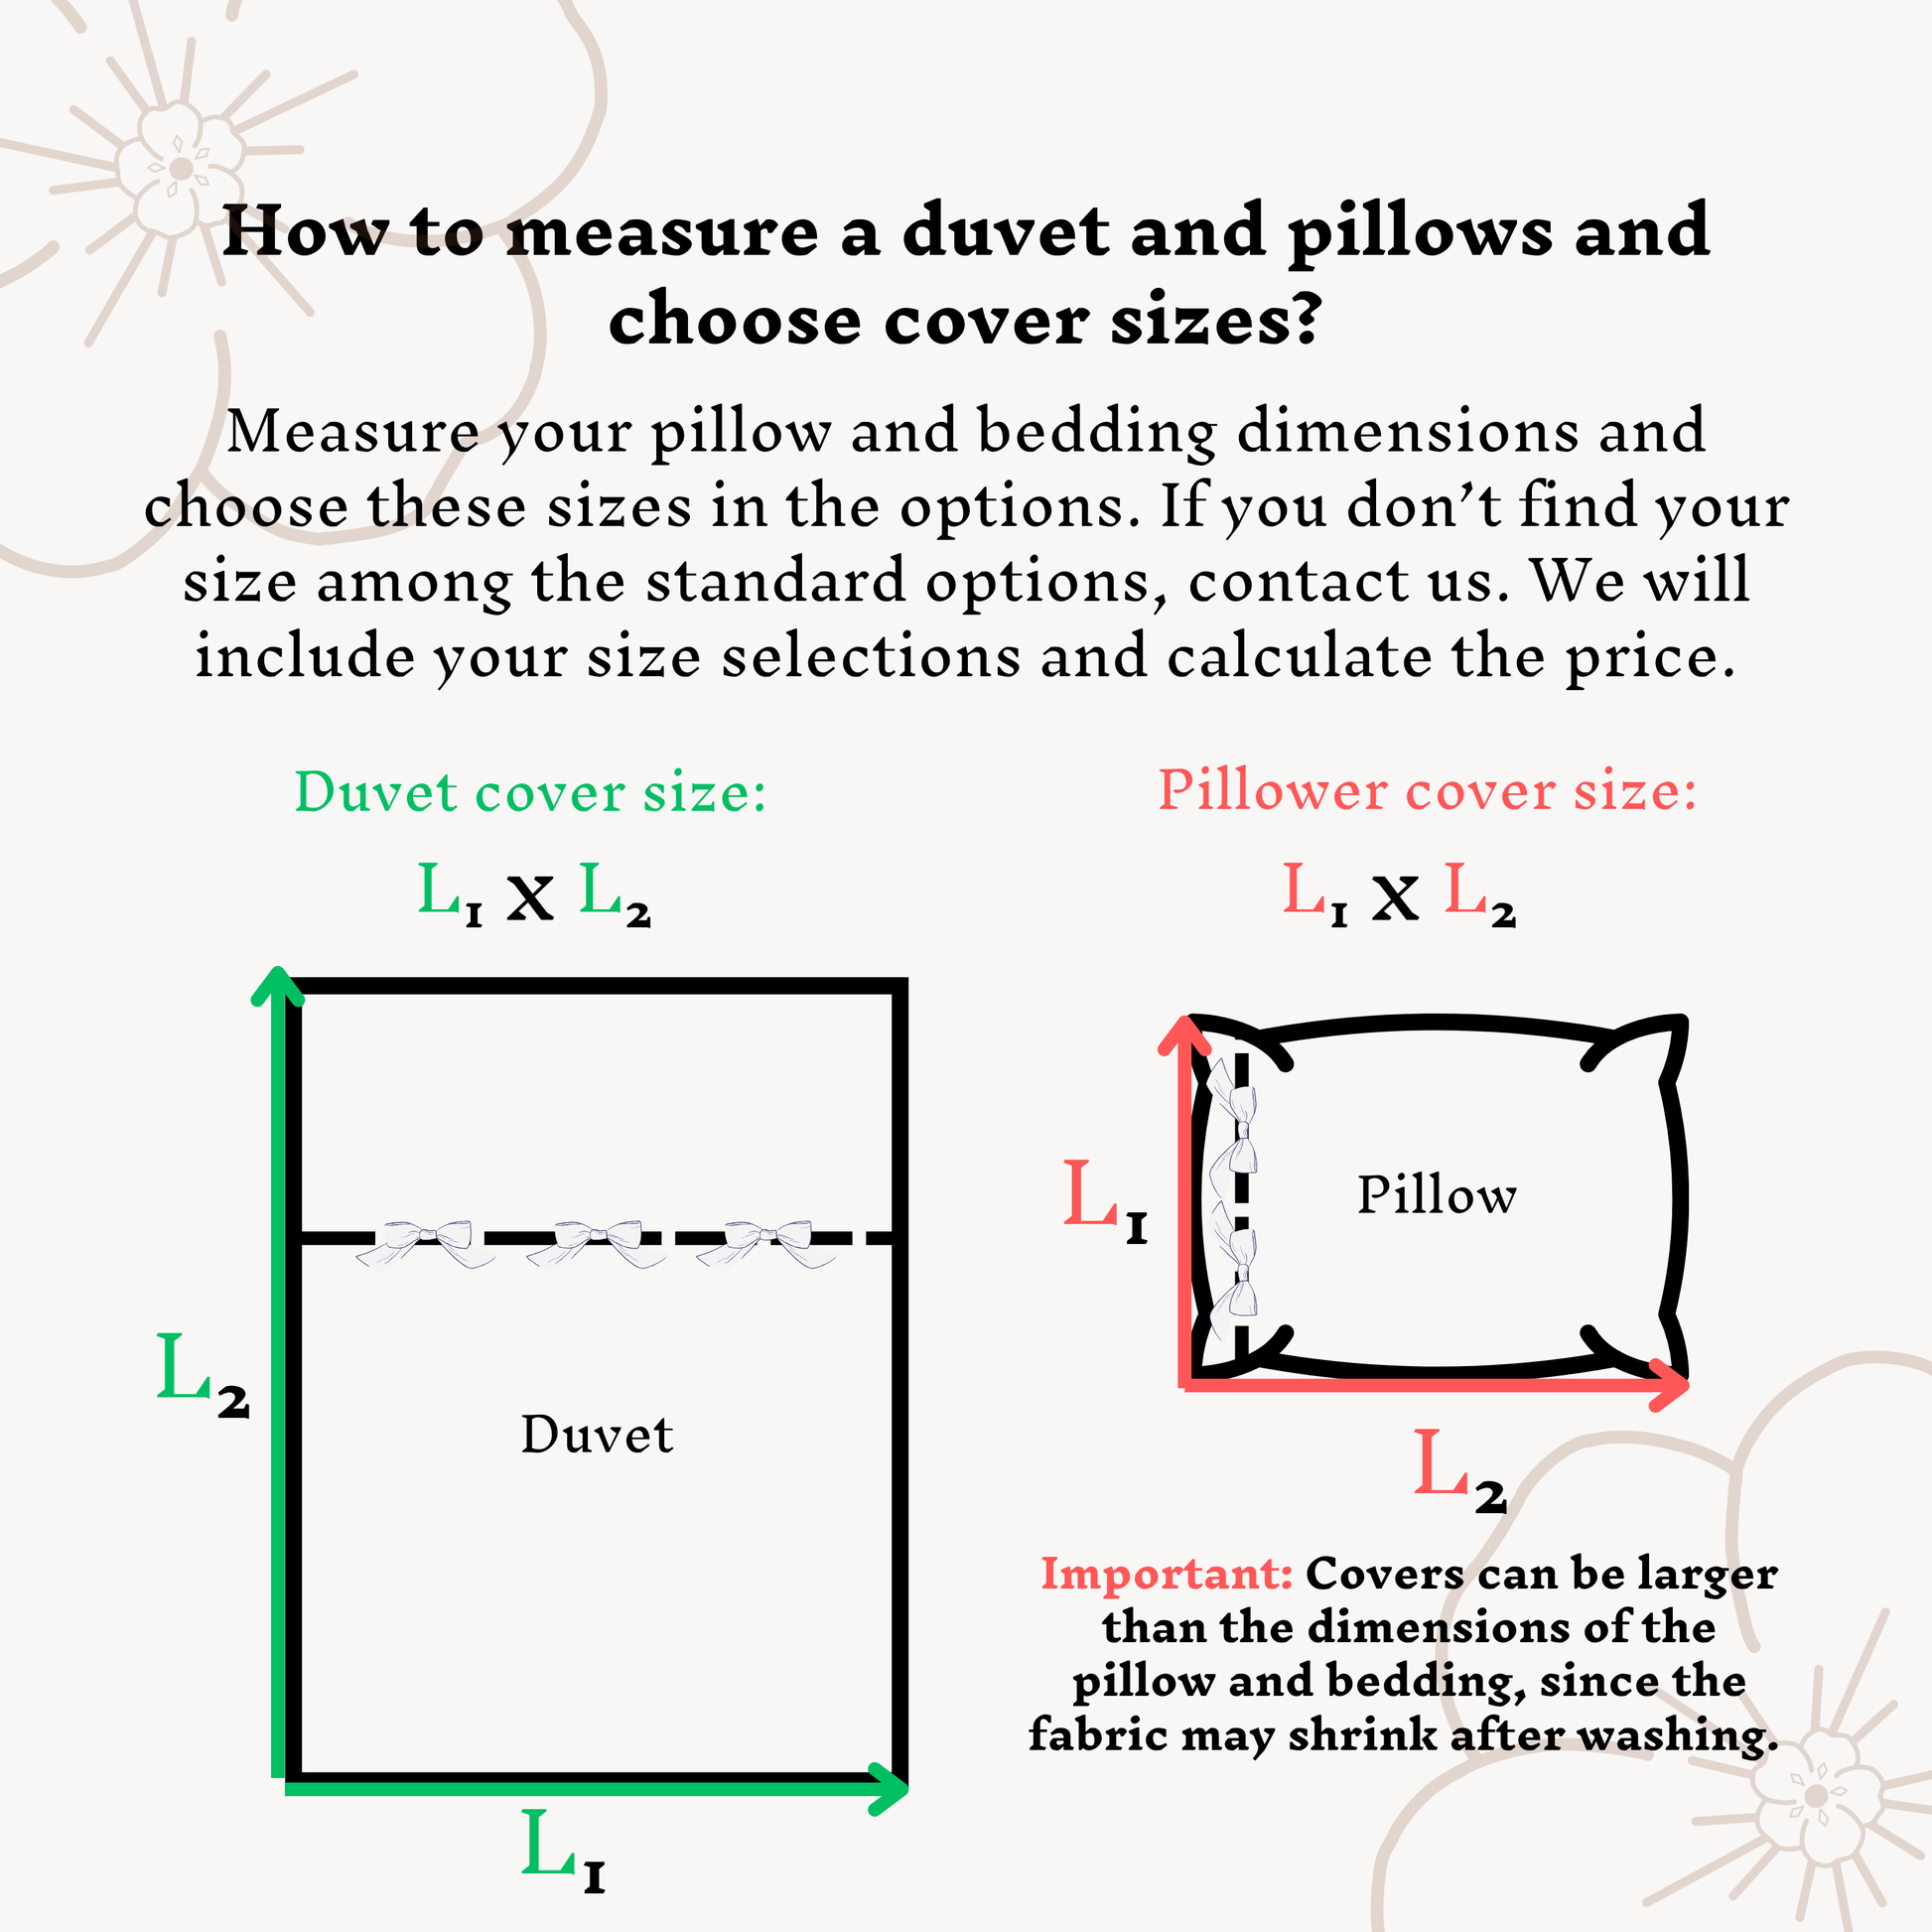 how to measure a duvet and pillows and choose bedding sizes